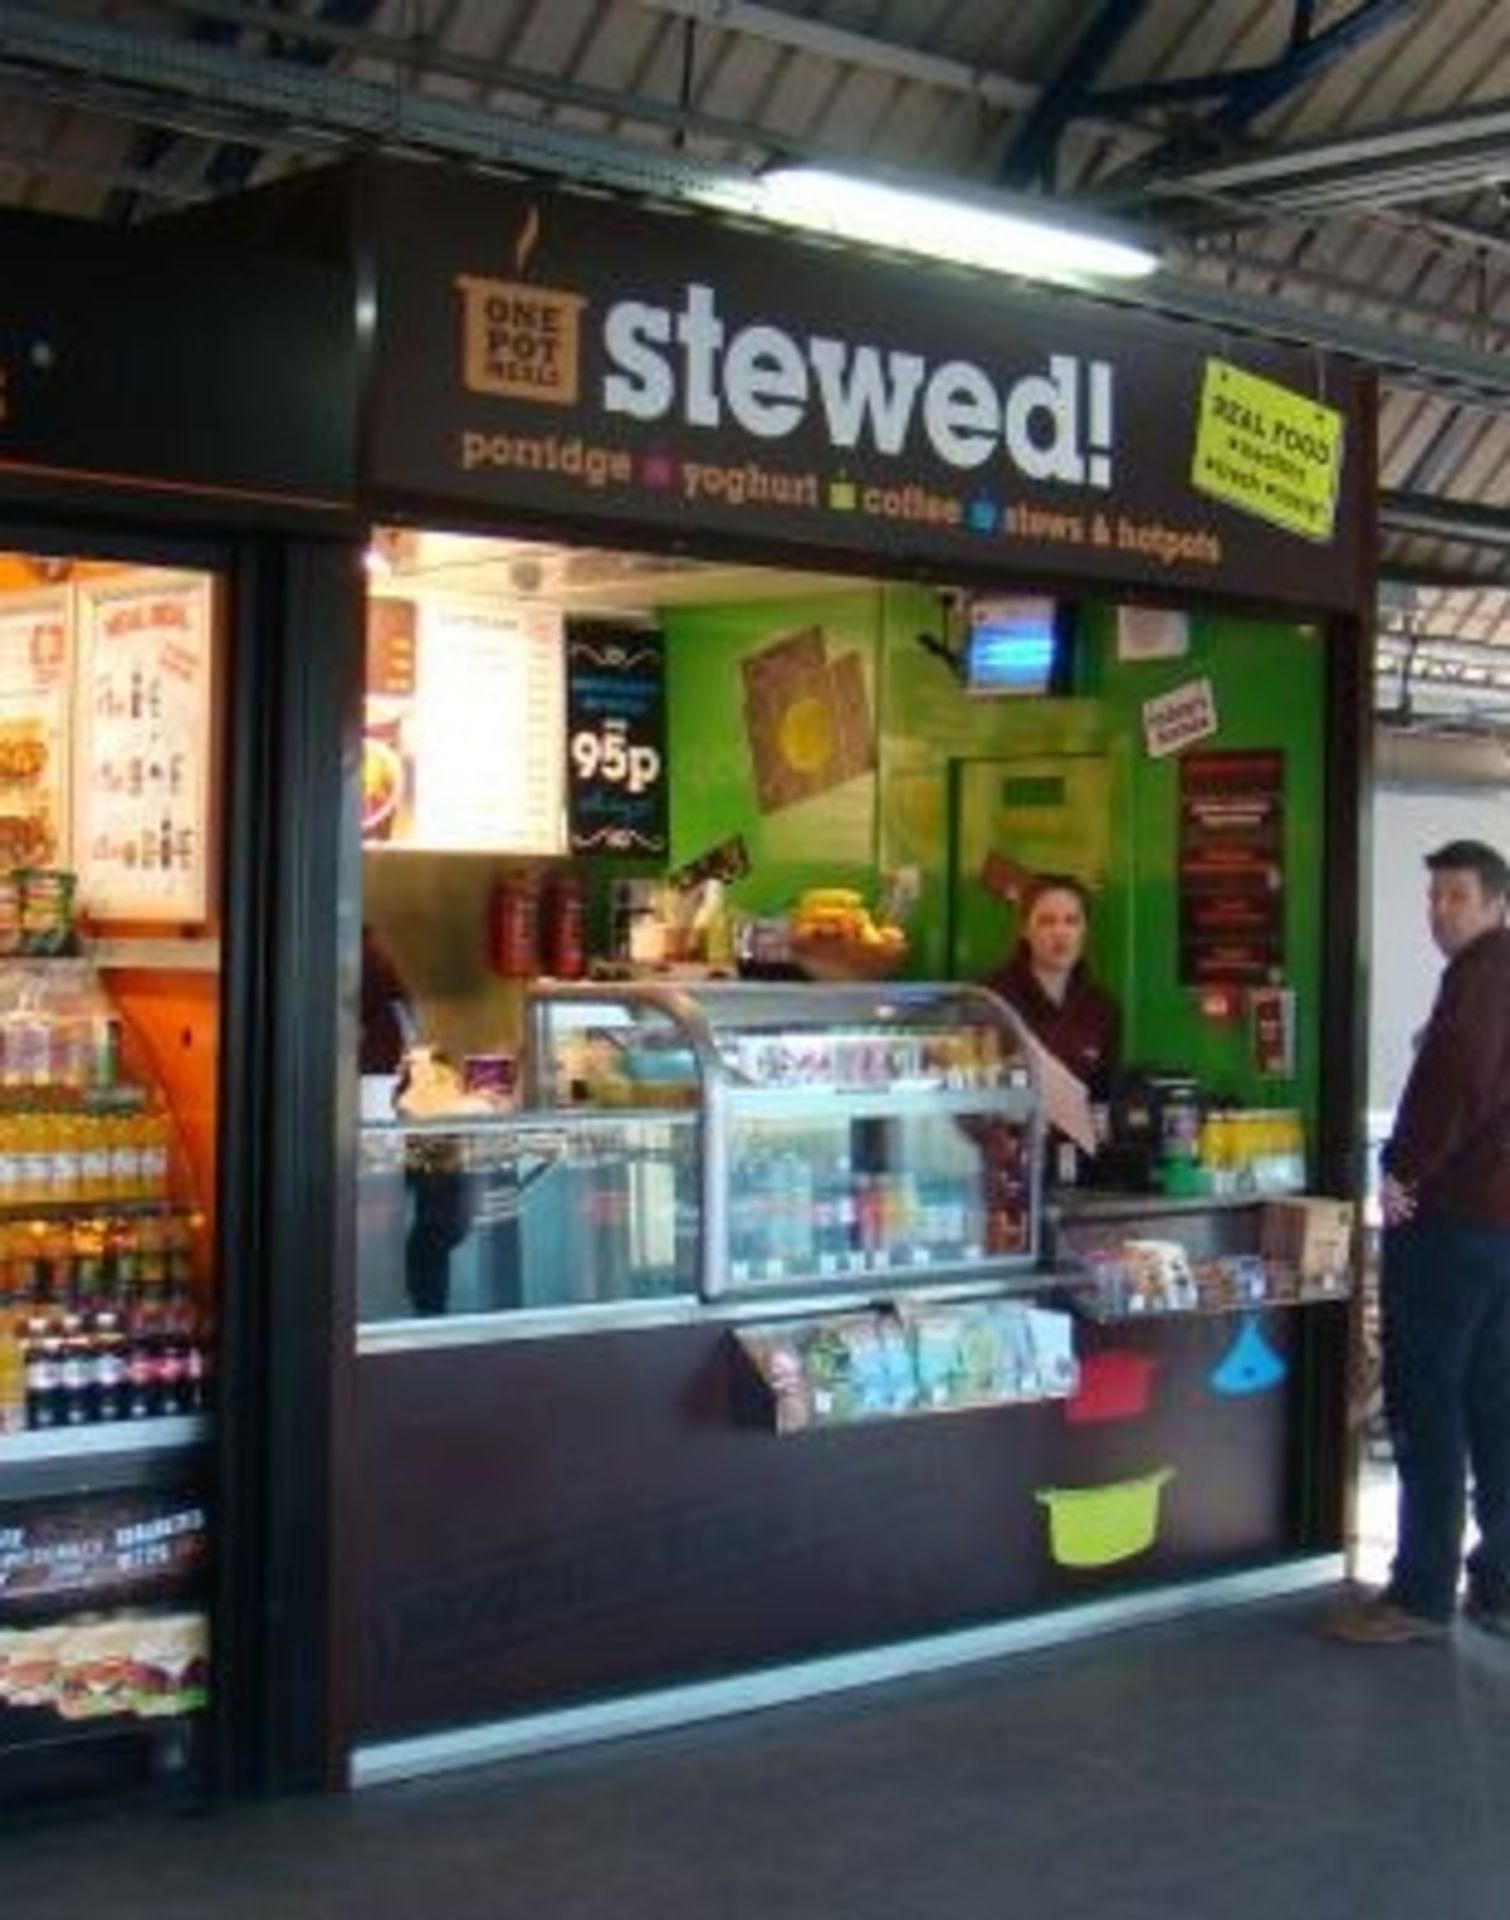 AJC Retail Solutions - Stewed Food and Coffee Kiosk - Complete Business Opportunity! - Image 2 of 25